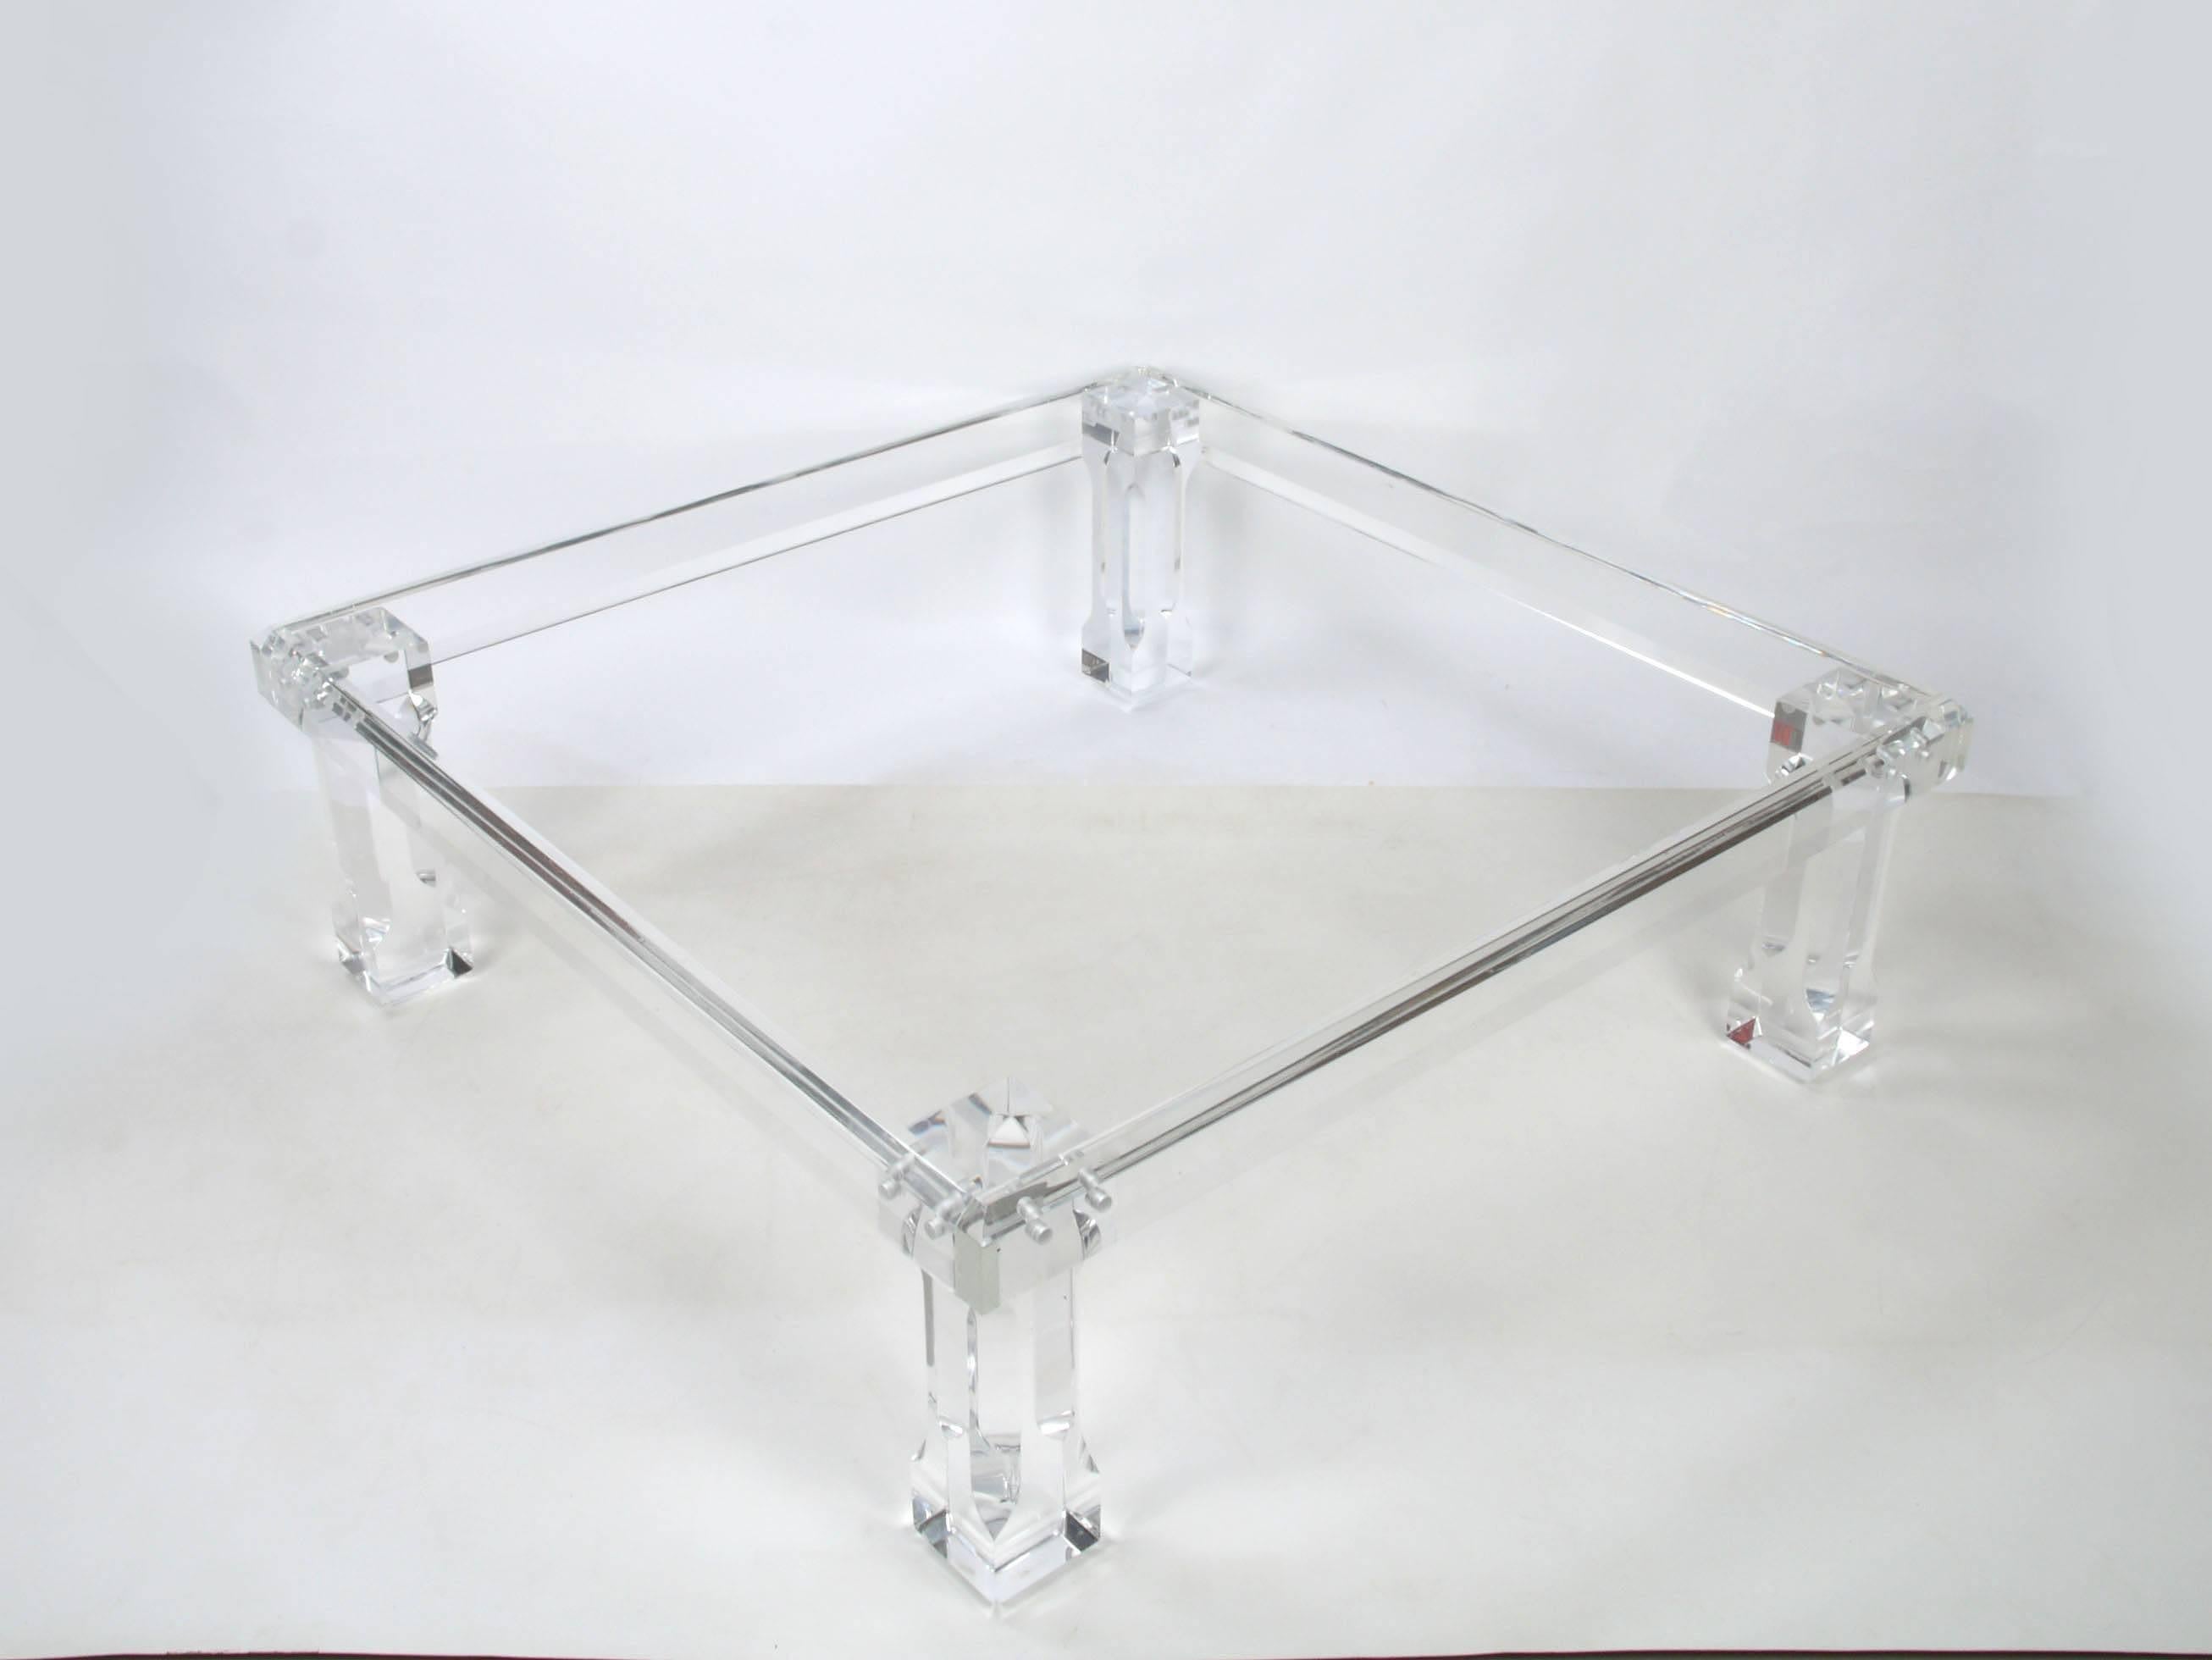 Vintage square Lucite coffee table. Marked on the leg: VJJ1977. 
This design is timeless and the quality of craftsmanship is simply unparalleled.